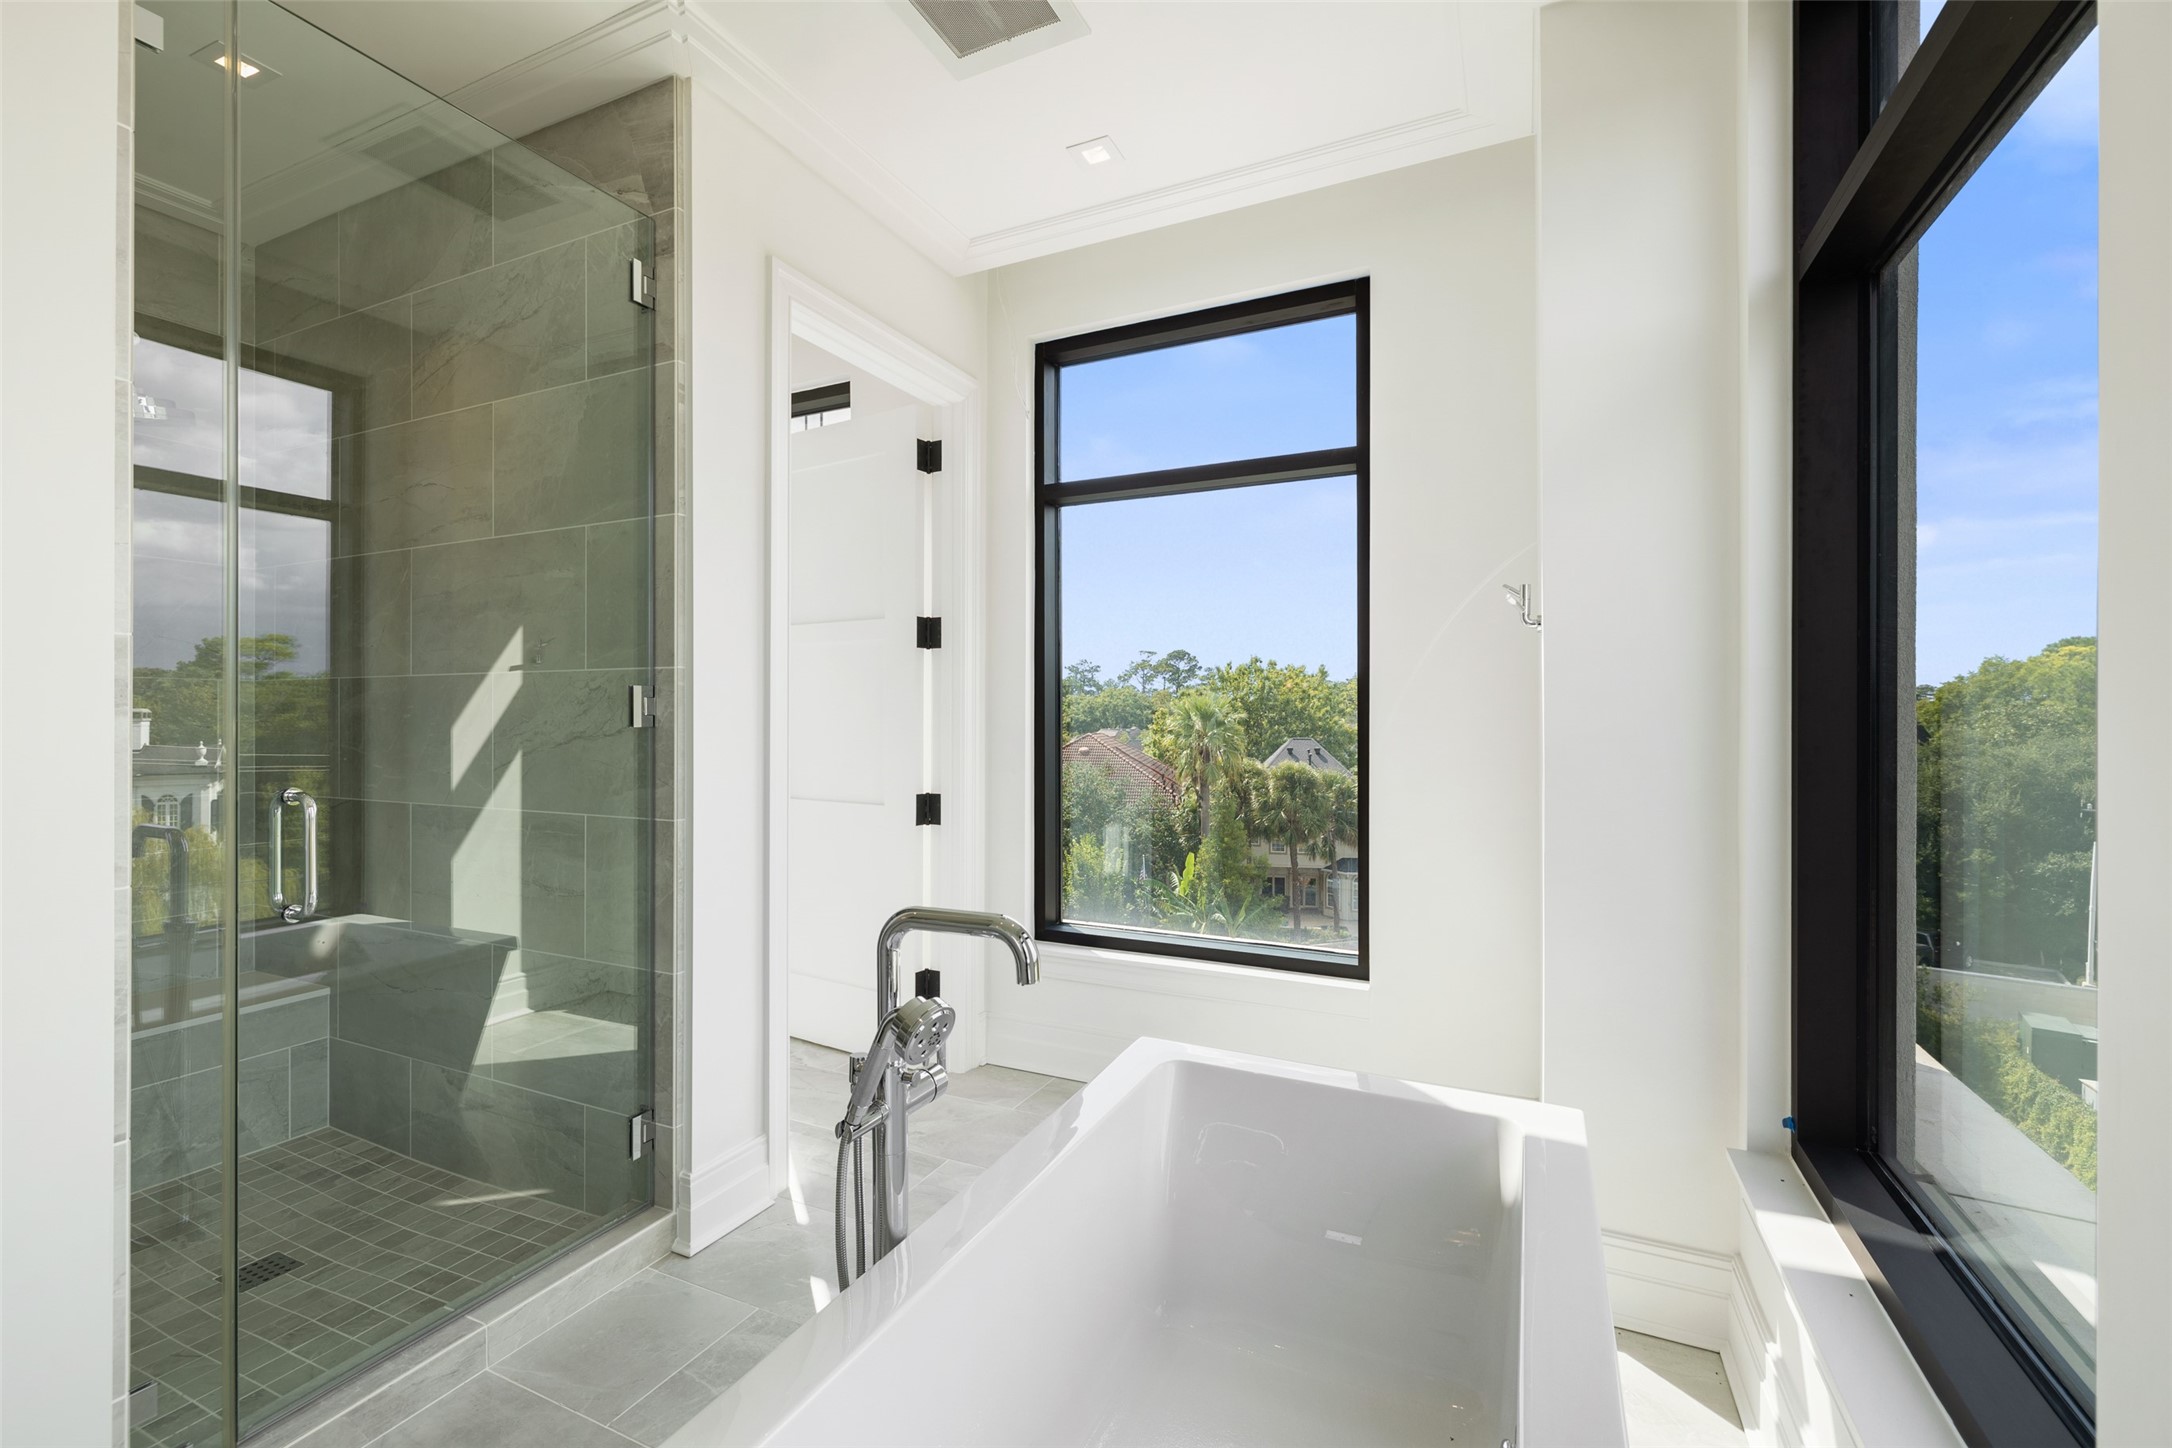 The Primary Bathroom also features a walk-in shower with bench.